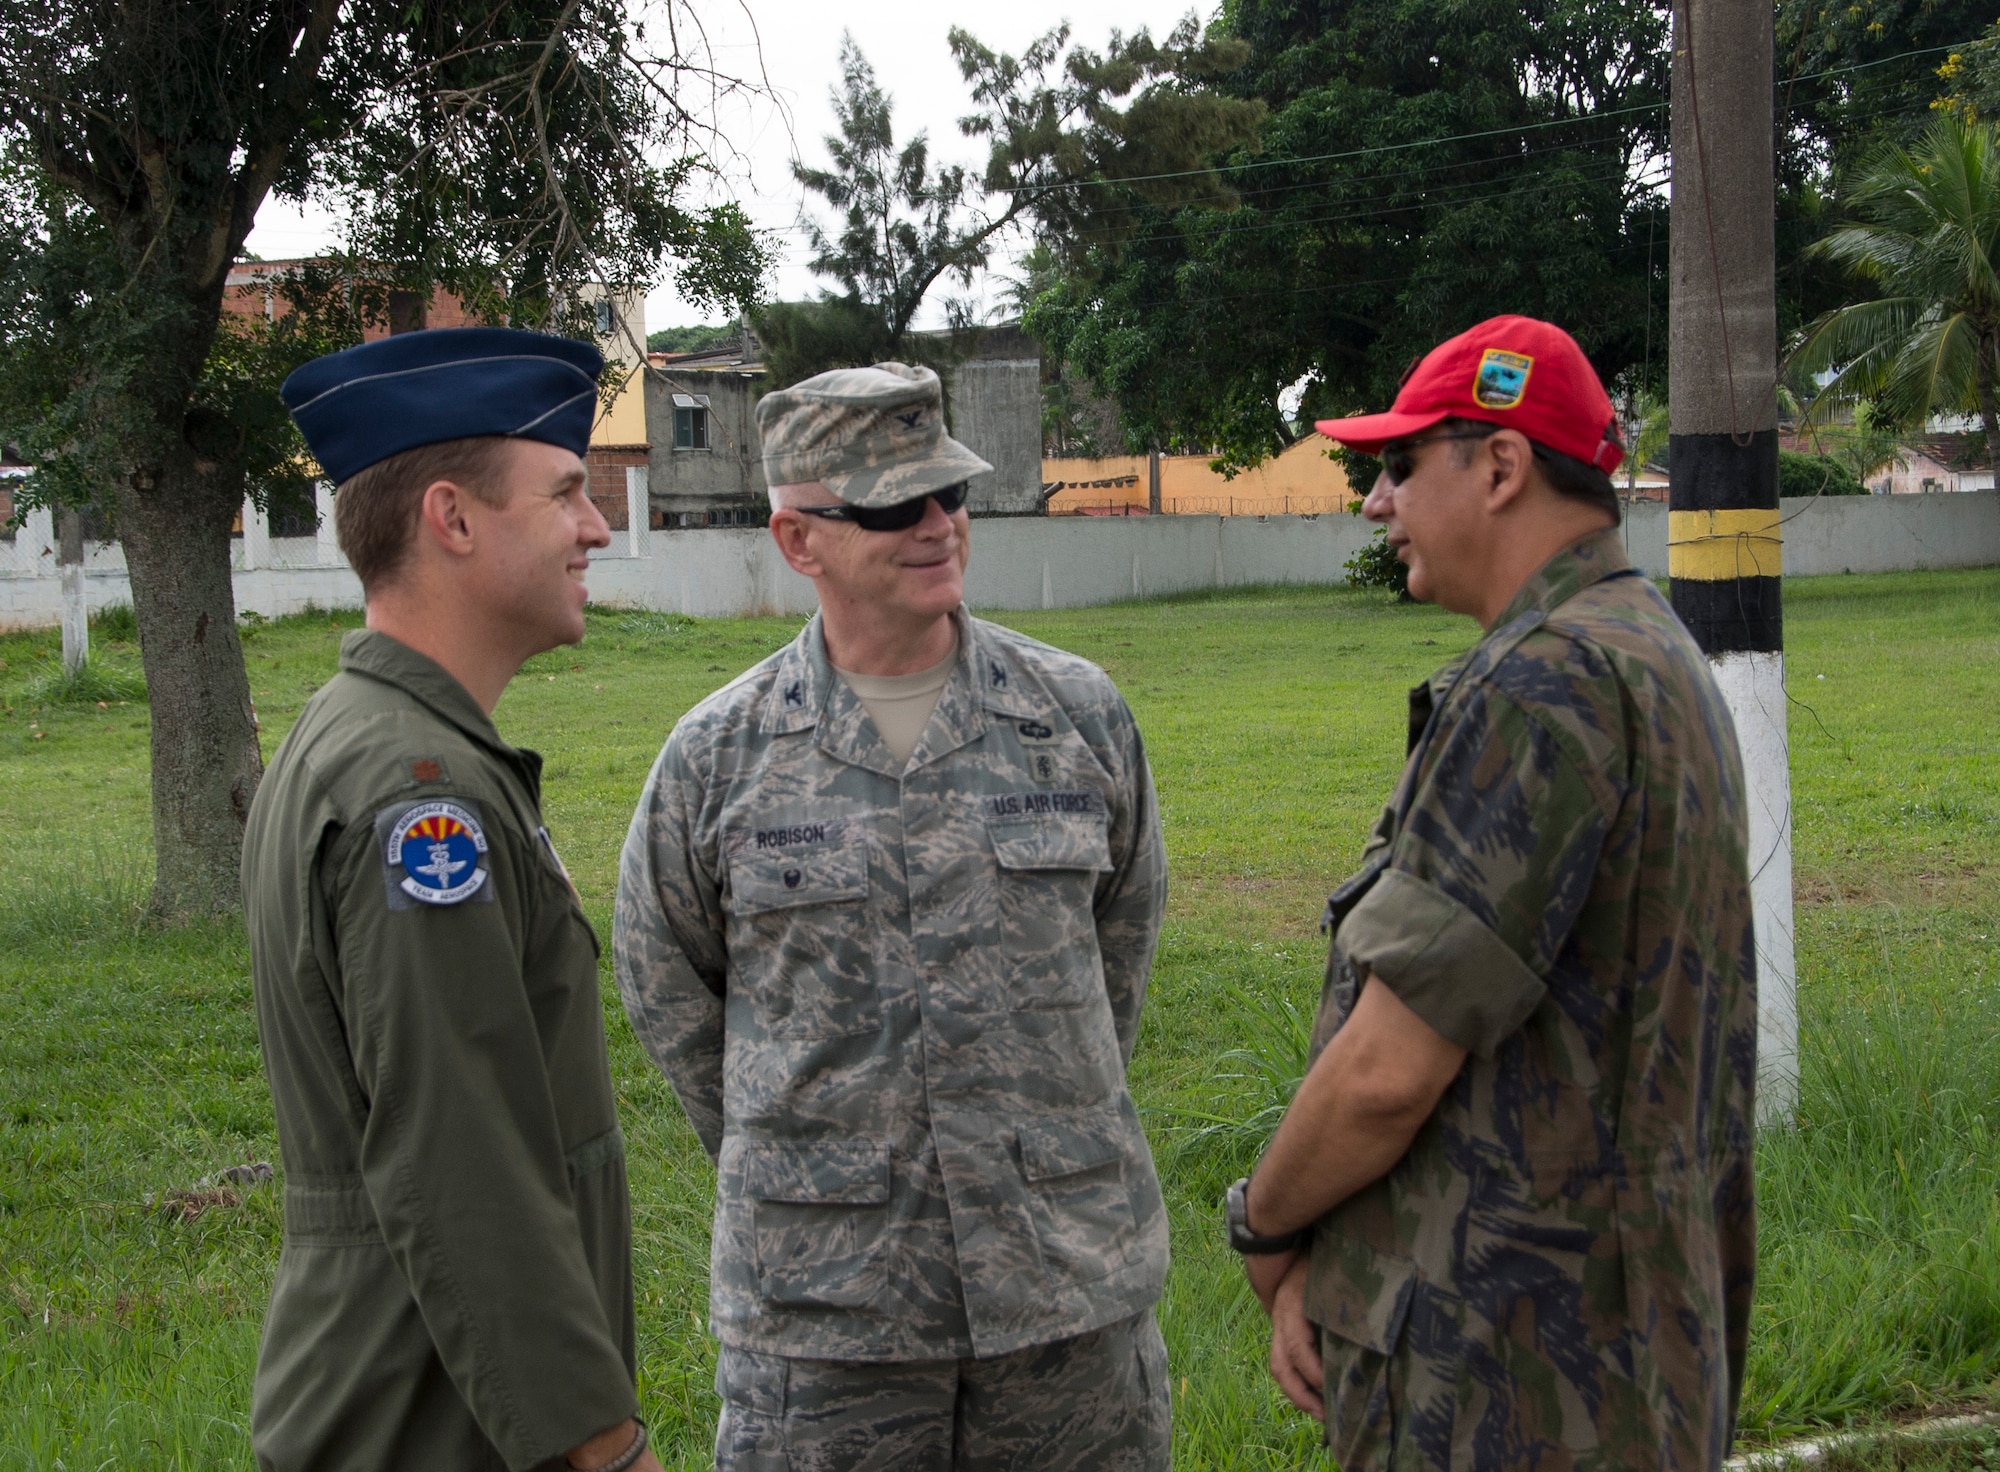 (Left) Maj. Maj. Brian Neese, 12th Air Force (Air Forces Southern) chief of international health specialists division, and Col. Elmo Robison, Headquarters Air Force chief of expeditionary operations and policy, speak with a member of the Brazilian air force during an Expeditionary Medical Support training site visit on April 22, 2015, in Rio de Janeiro, Brazil. During the site visit members of AFSOUTH were able to get an up close look at how their Brazilian counterparts set up the tents for EMEDS. (U.S. Air Force photo by Staff Sgt. Adam Grant/Released)